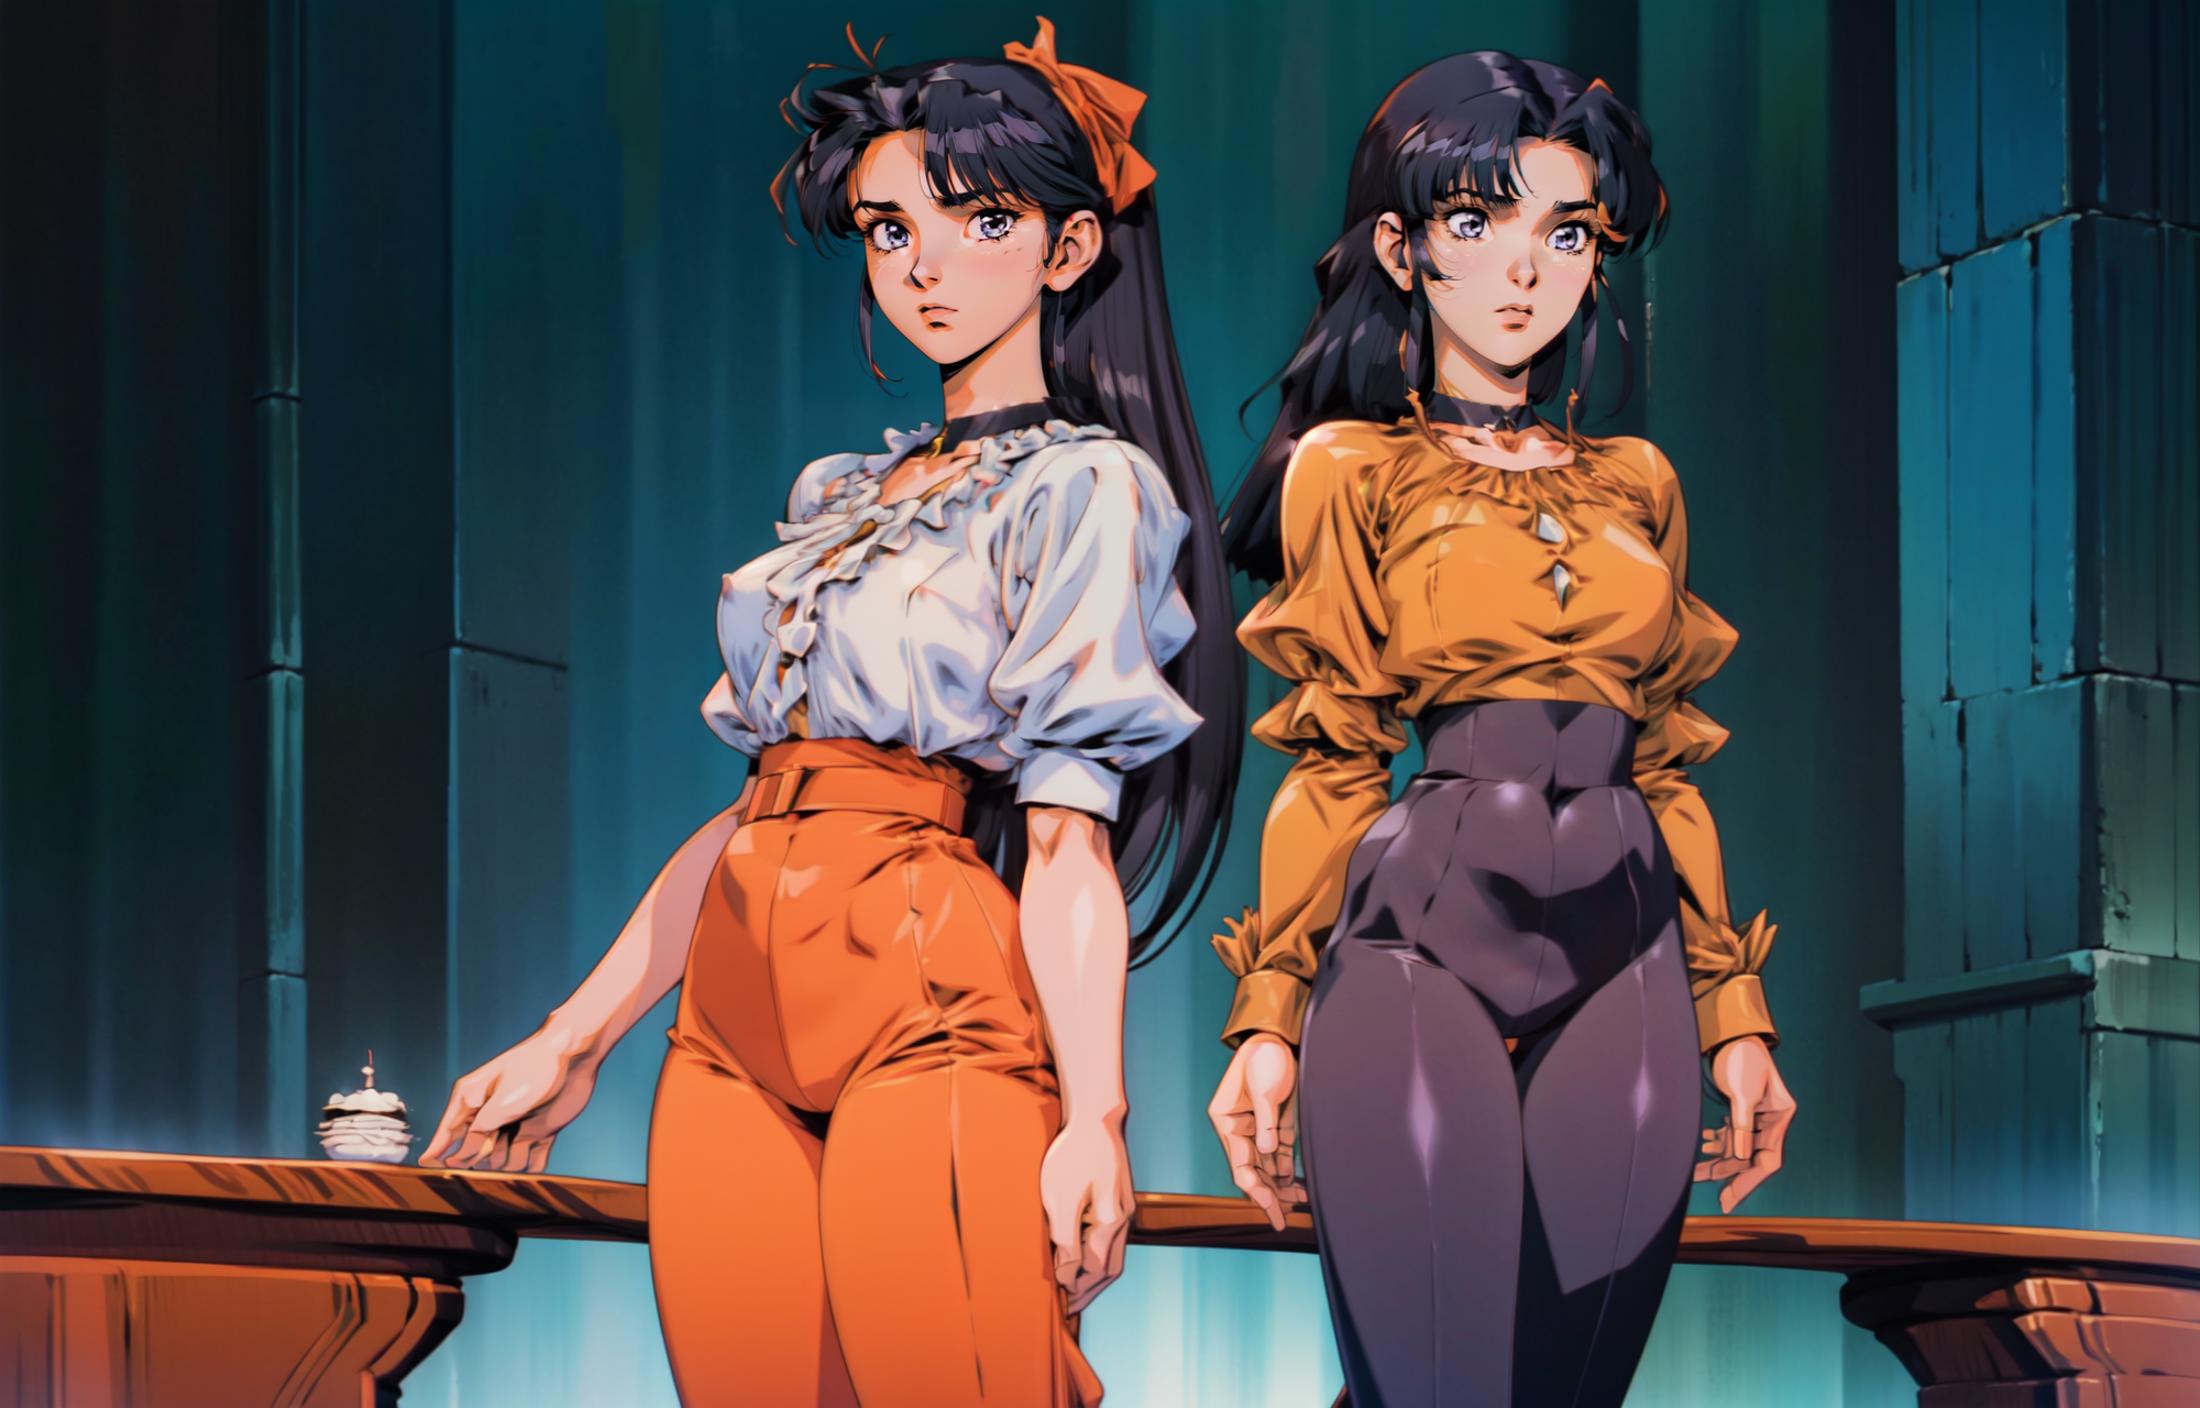 Two anime characters posing next to each other, one wearing orange pants and the other wearing black pants.